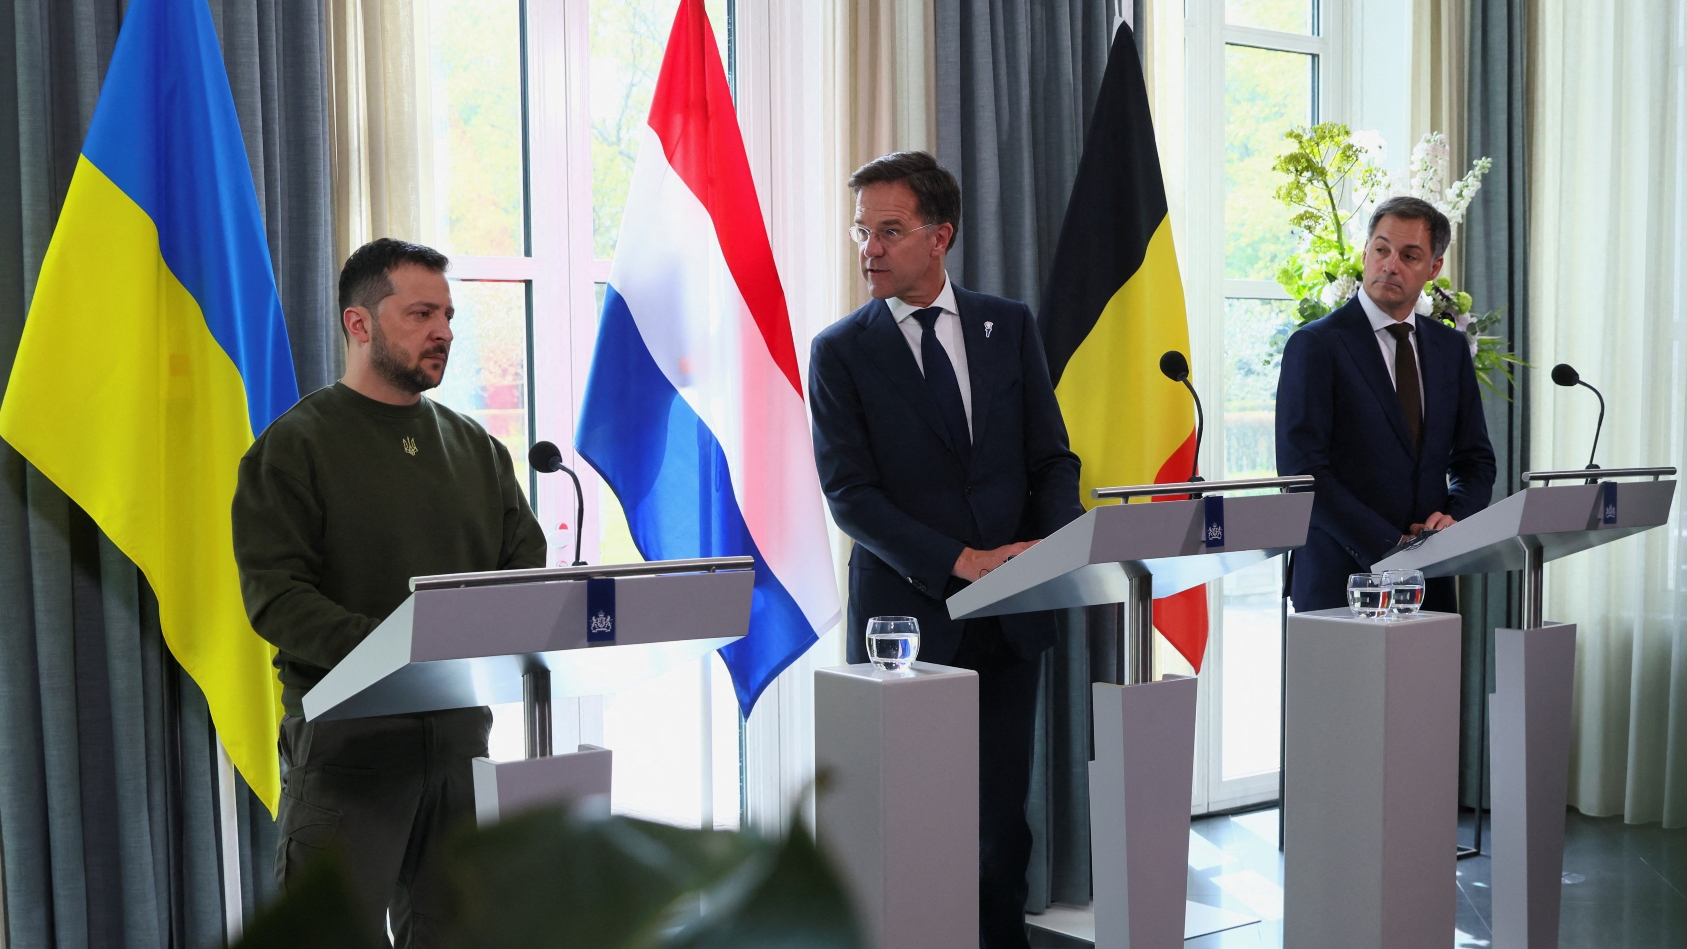 Ukraine's Zelenskyy attends a news conference with Dutch Prime Minister Mark Rutte and Belgian Prime Minister Alexander De Croo./Yves Herman/Reuters